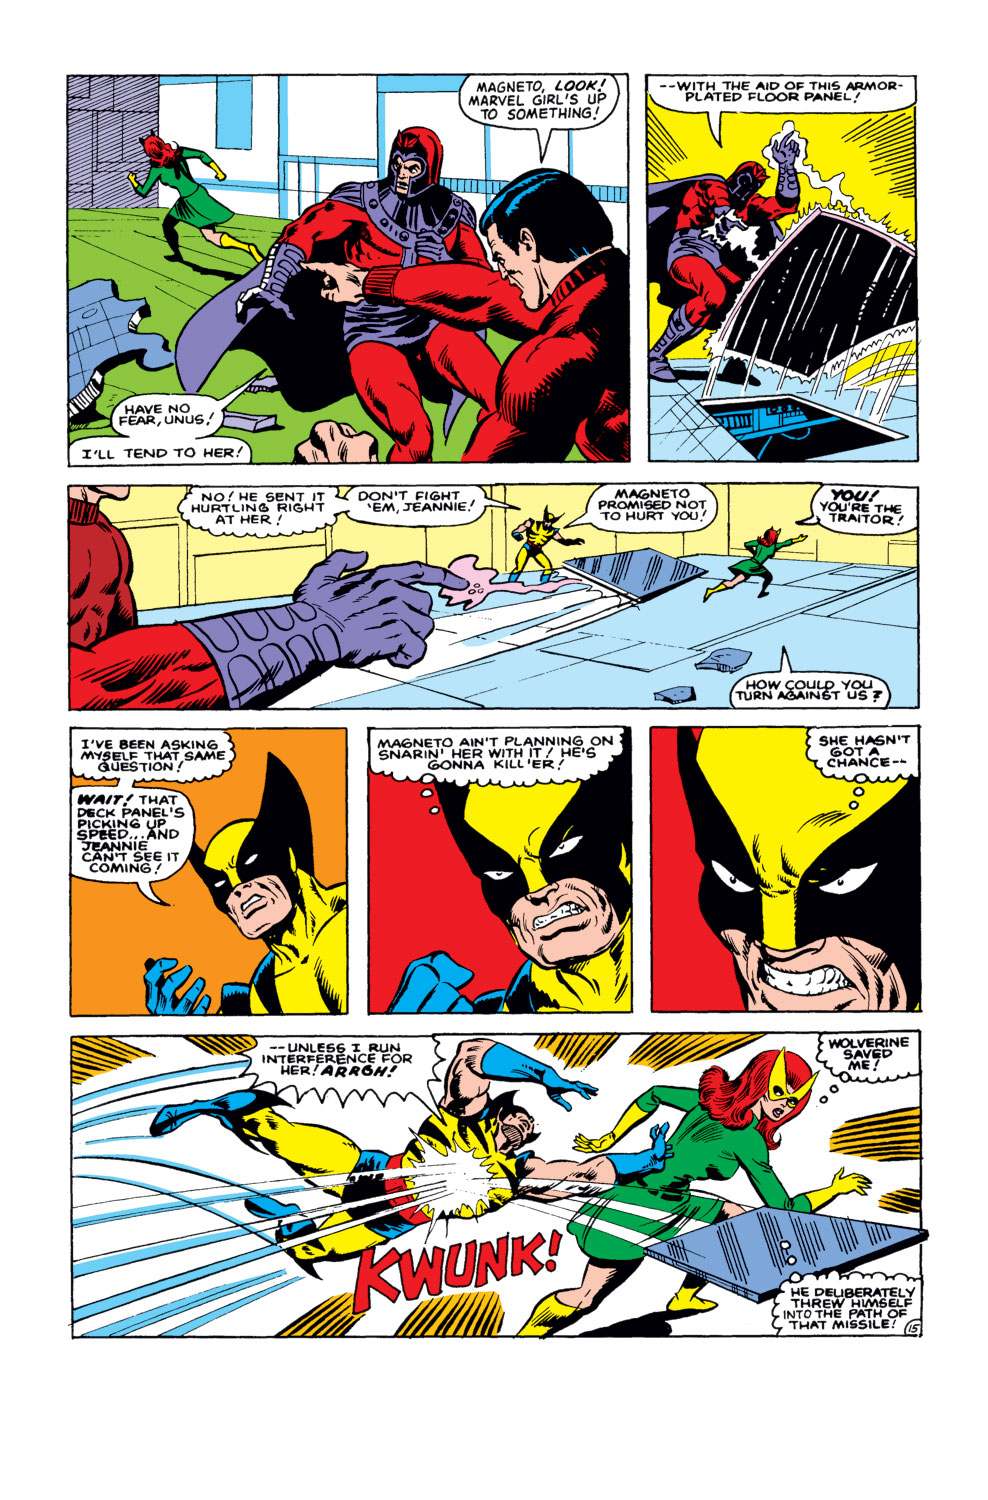 What If? (1977) issue 31 - Wolverine had killed the Hulk - Page 16